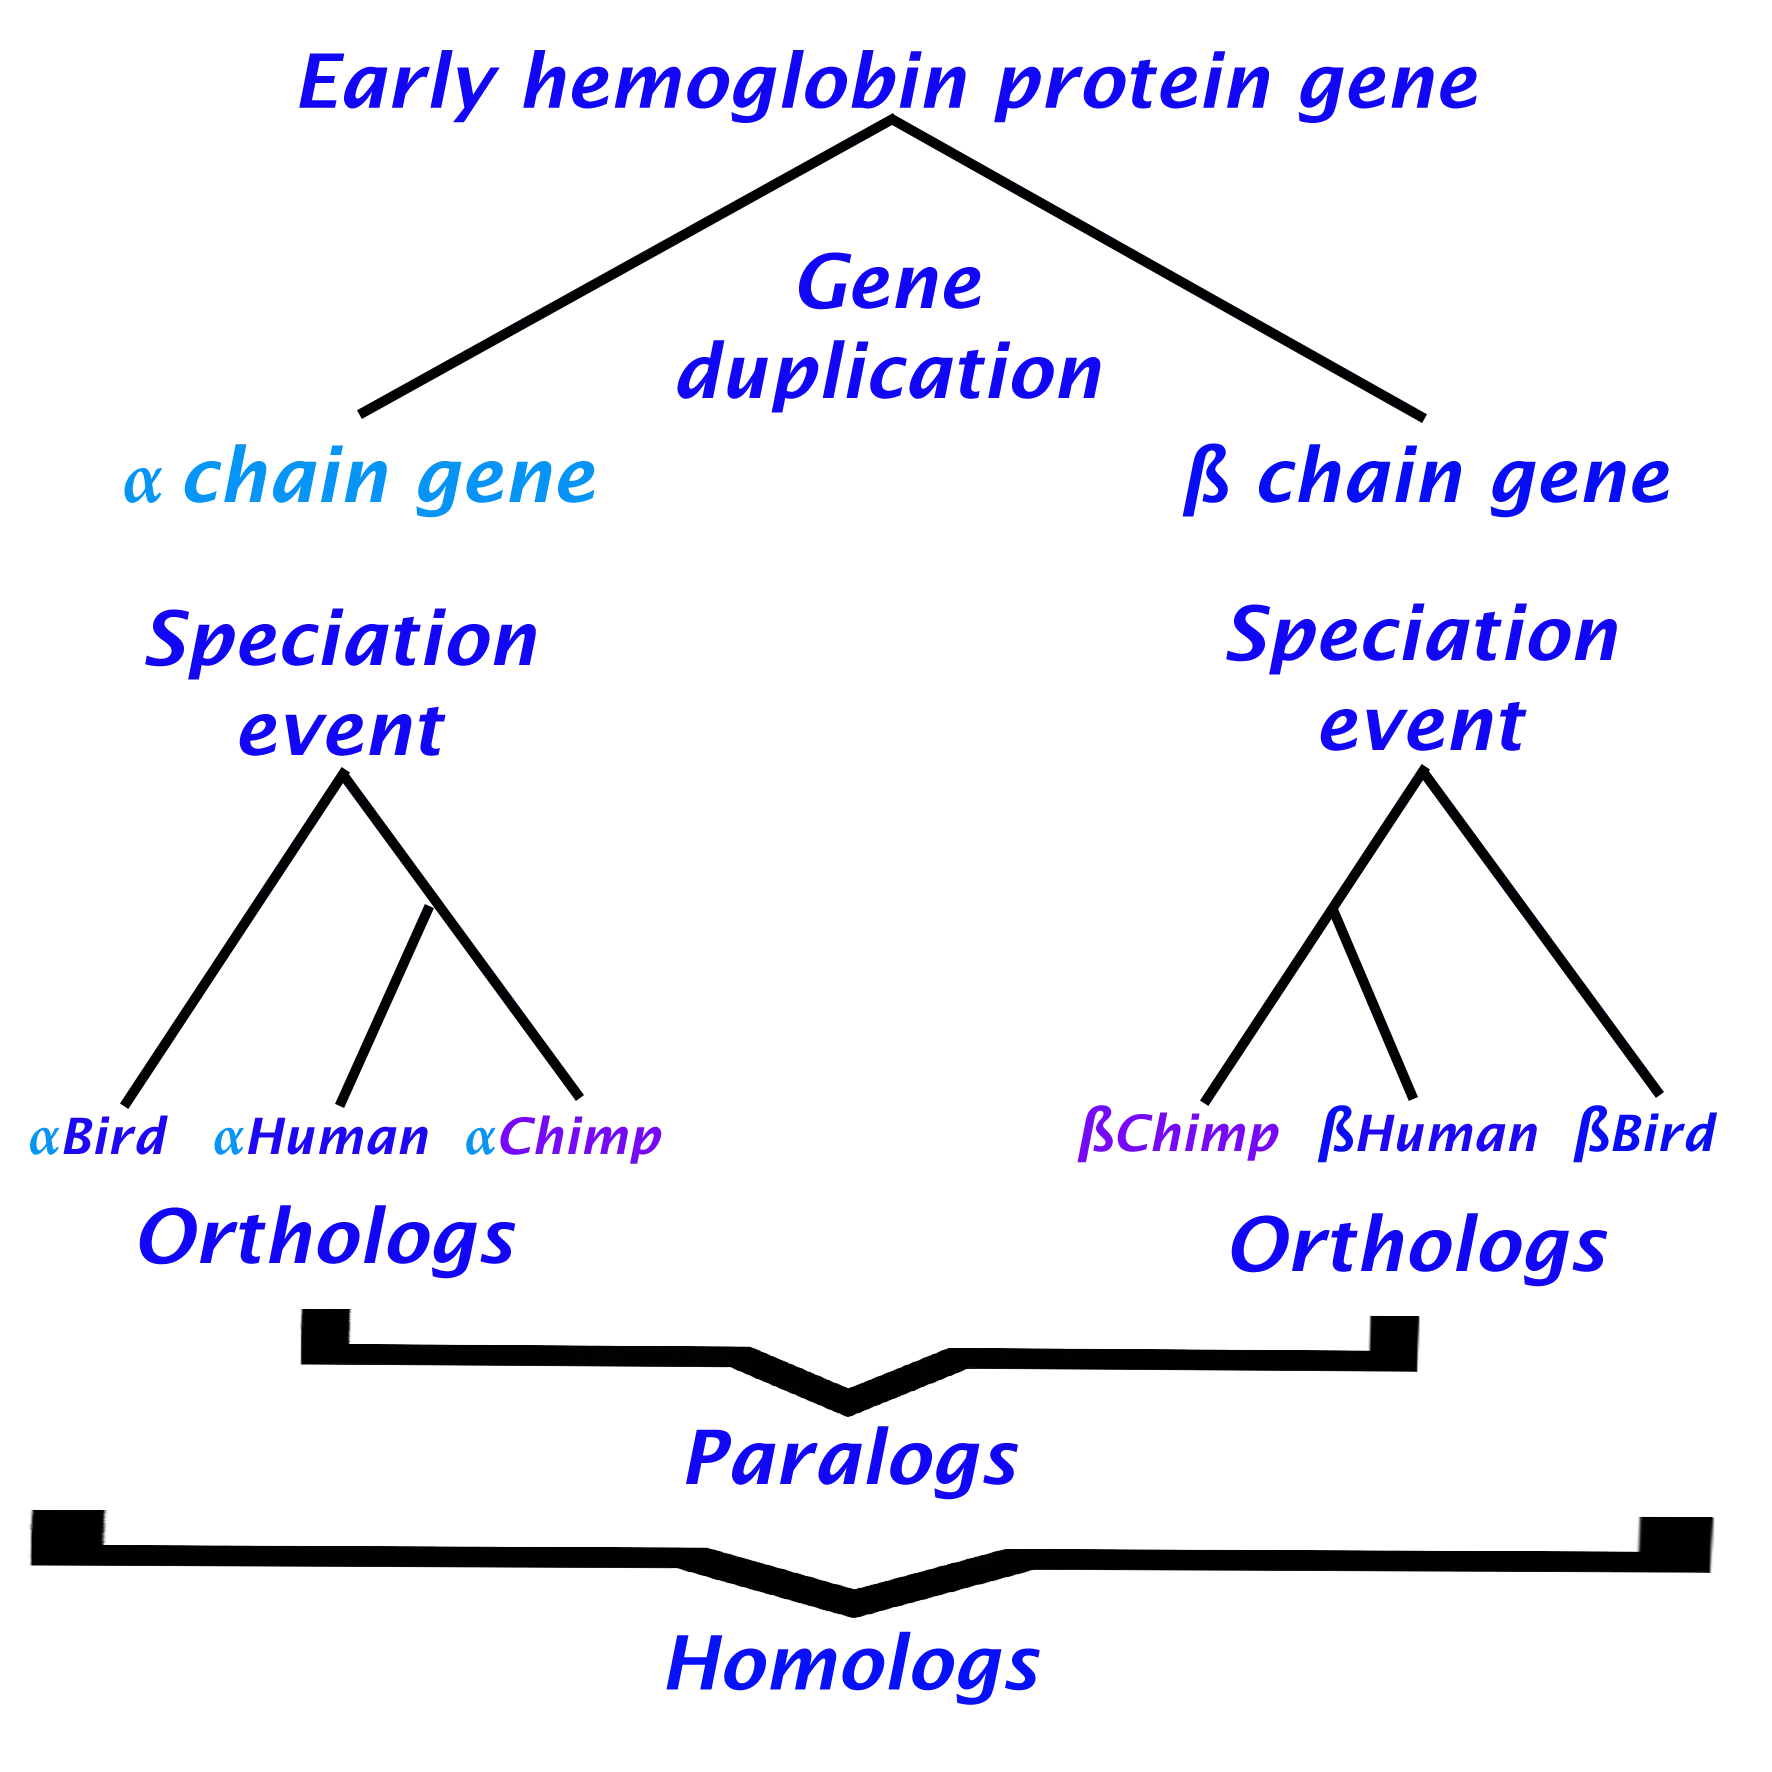 Example of human hemoglobin evolution. The phylogenetic tree shows the orthologous relation between alpha subunits, separate from their paralogs, the beta subunits. However, it is important to notice that all hemoglobin subunits, whether orthologous or paralogous, are homologs with a common evolutionary origin.